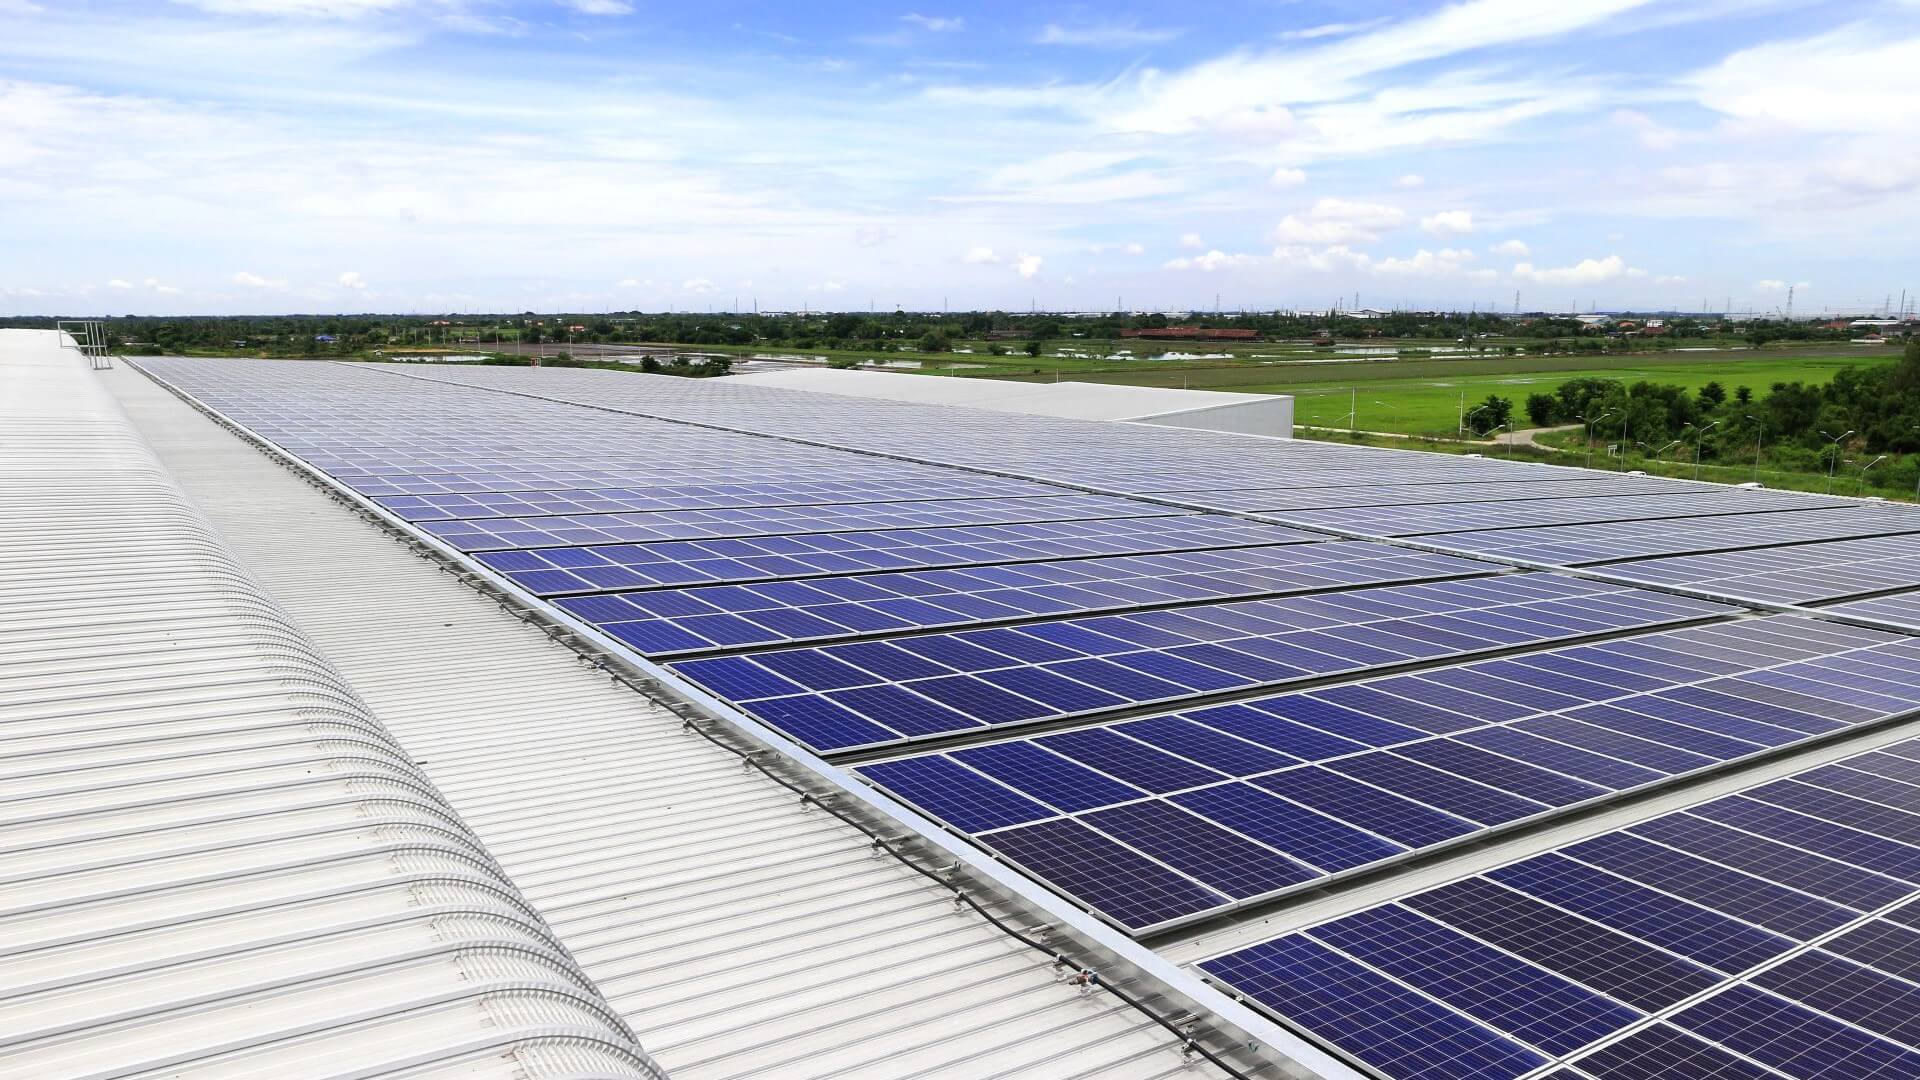 Close up of solar panels on rooftop, with green fields and blue sky in background